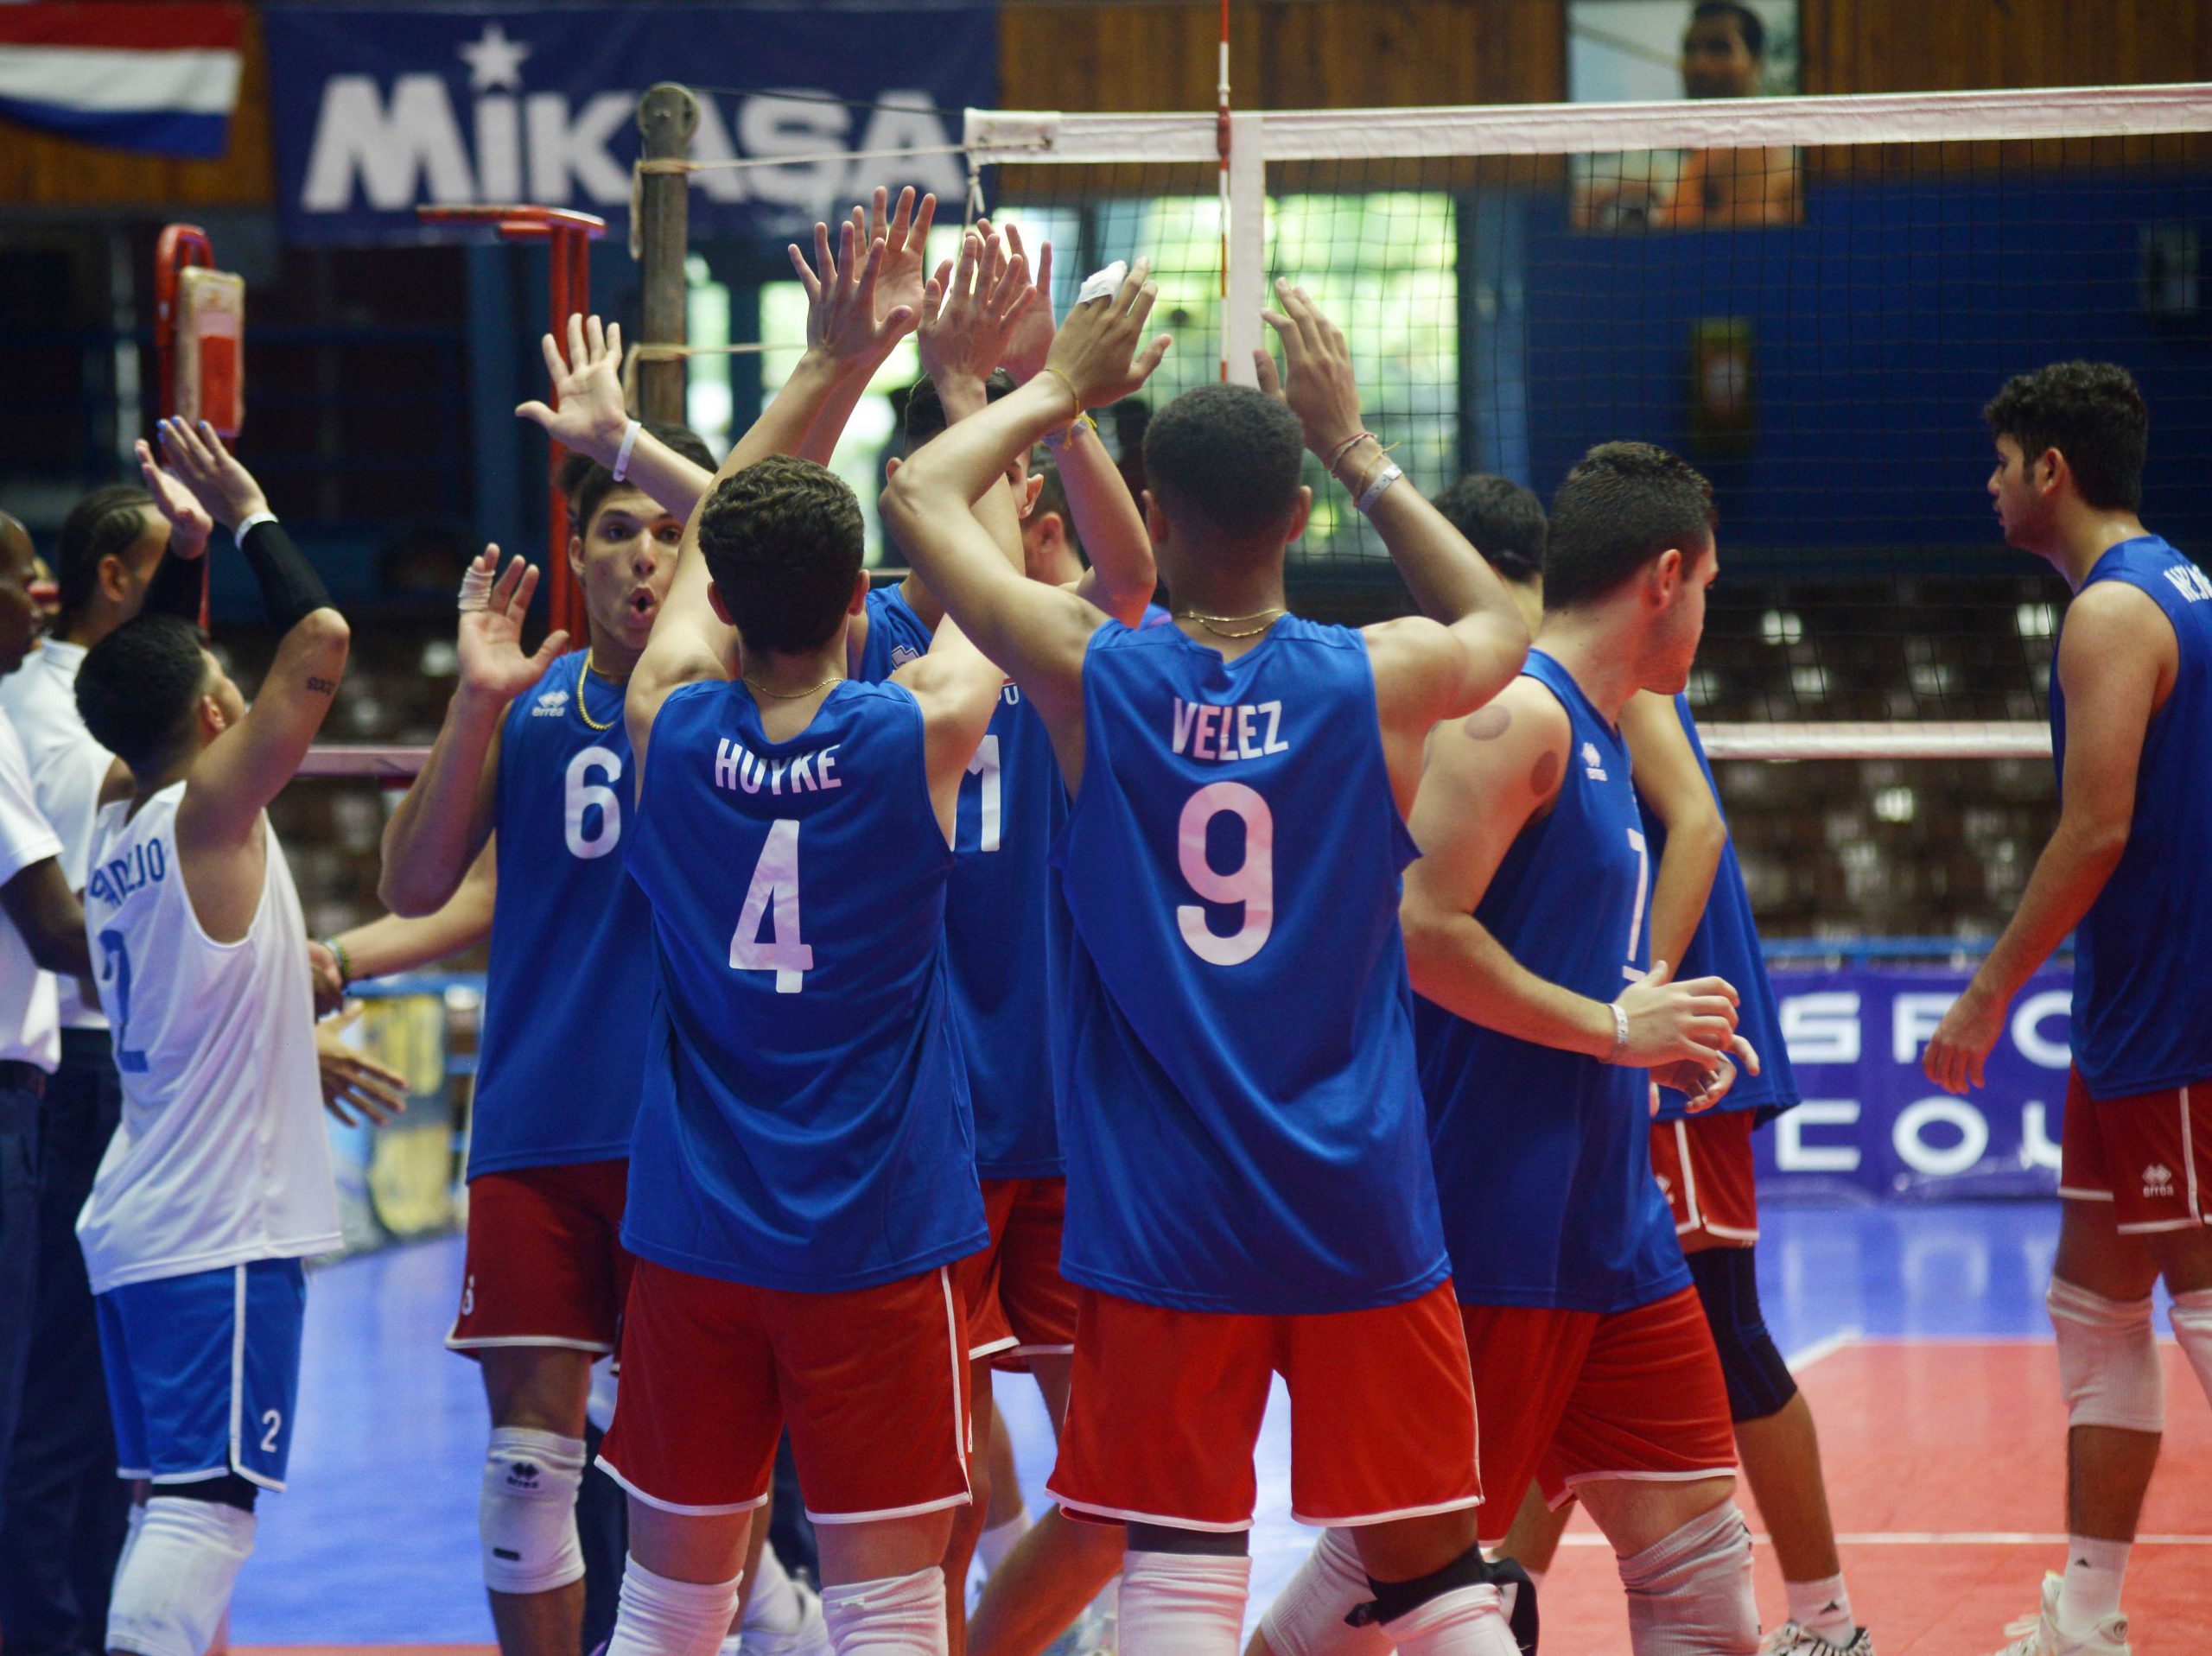 Puerto Rico secures second place in pool A at U21 Pan American Cup